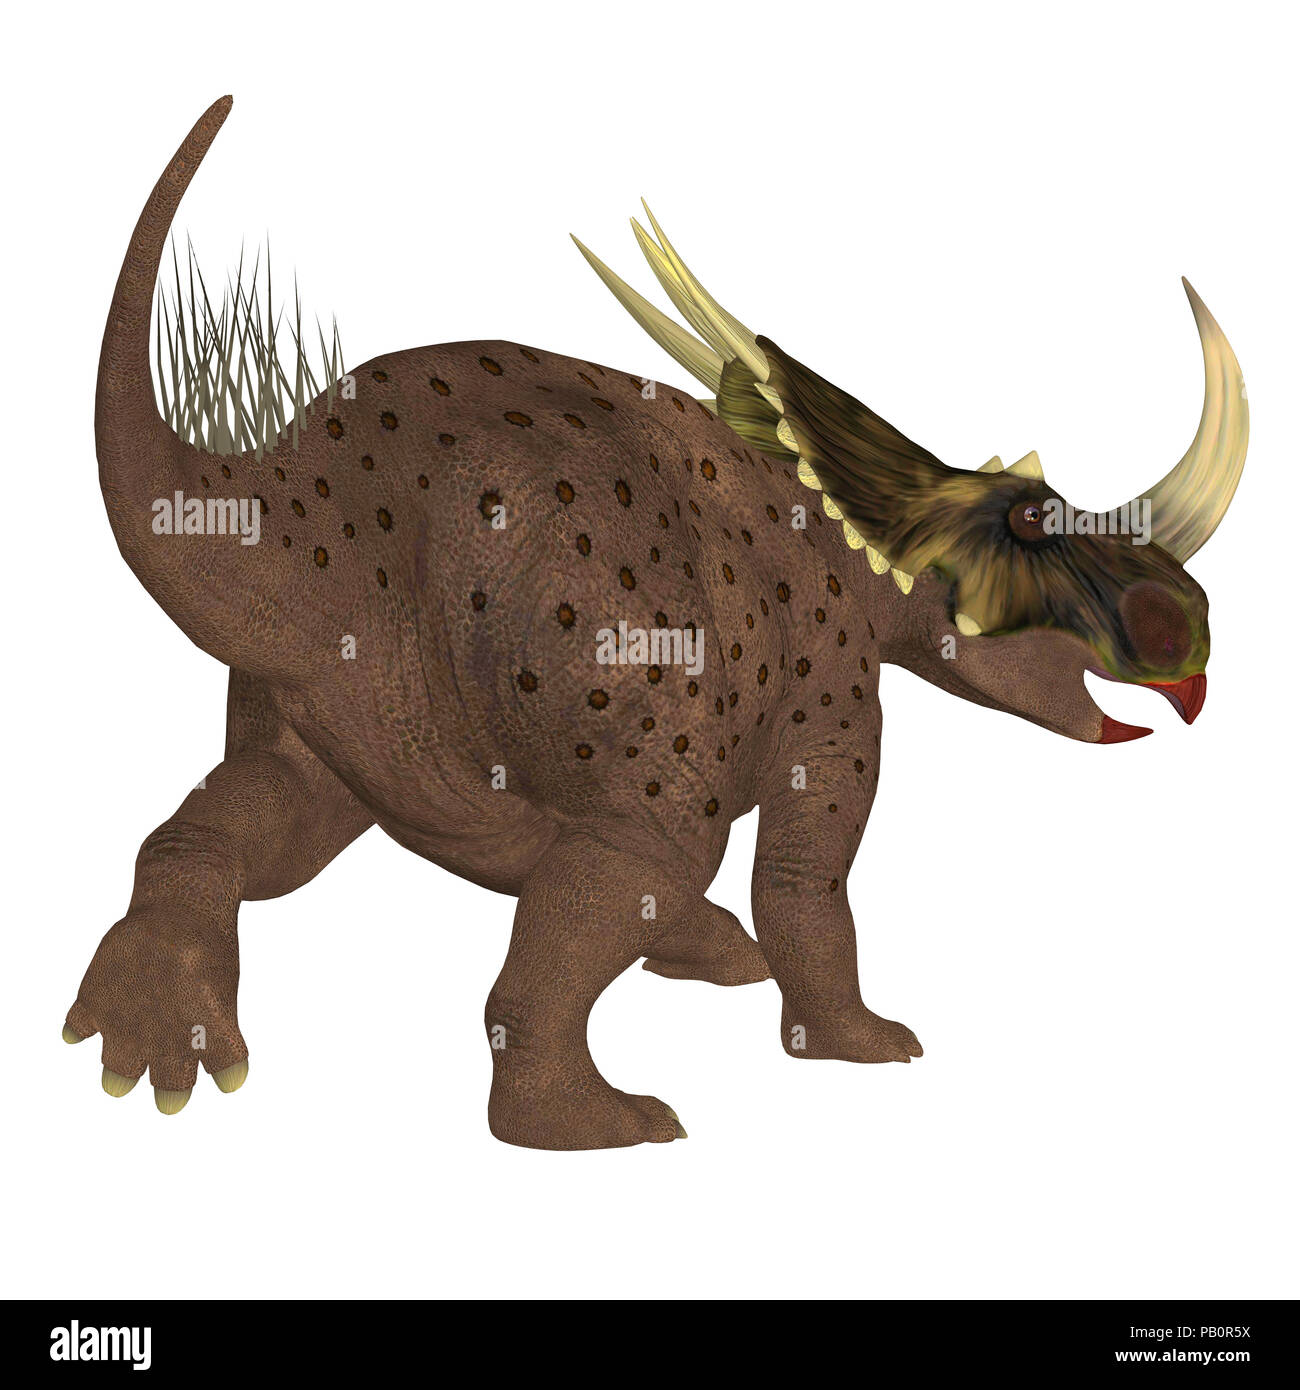 Brown Rubeosaurus Dinosaur Tail - Rubeosaurus was a Ceratopsian herbivorous dinosaur that lived during the Cretaceous Period of North America. Stock Photo